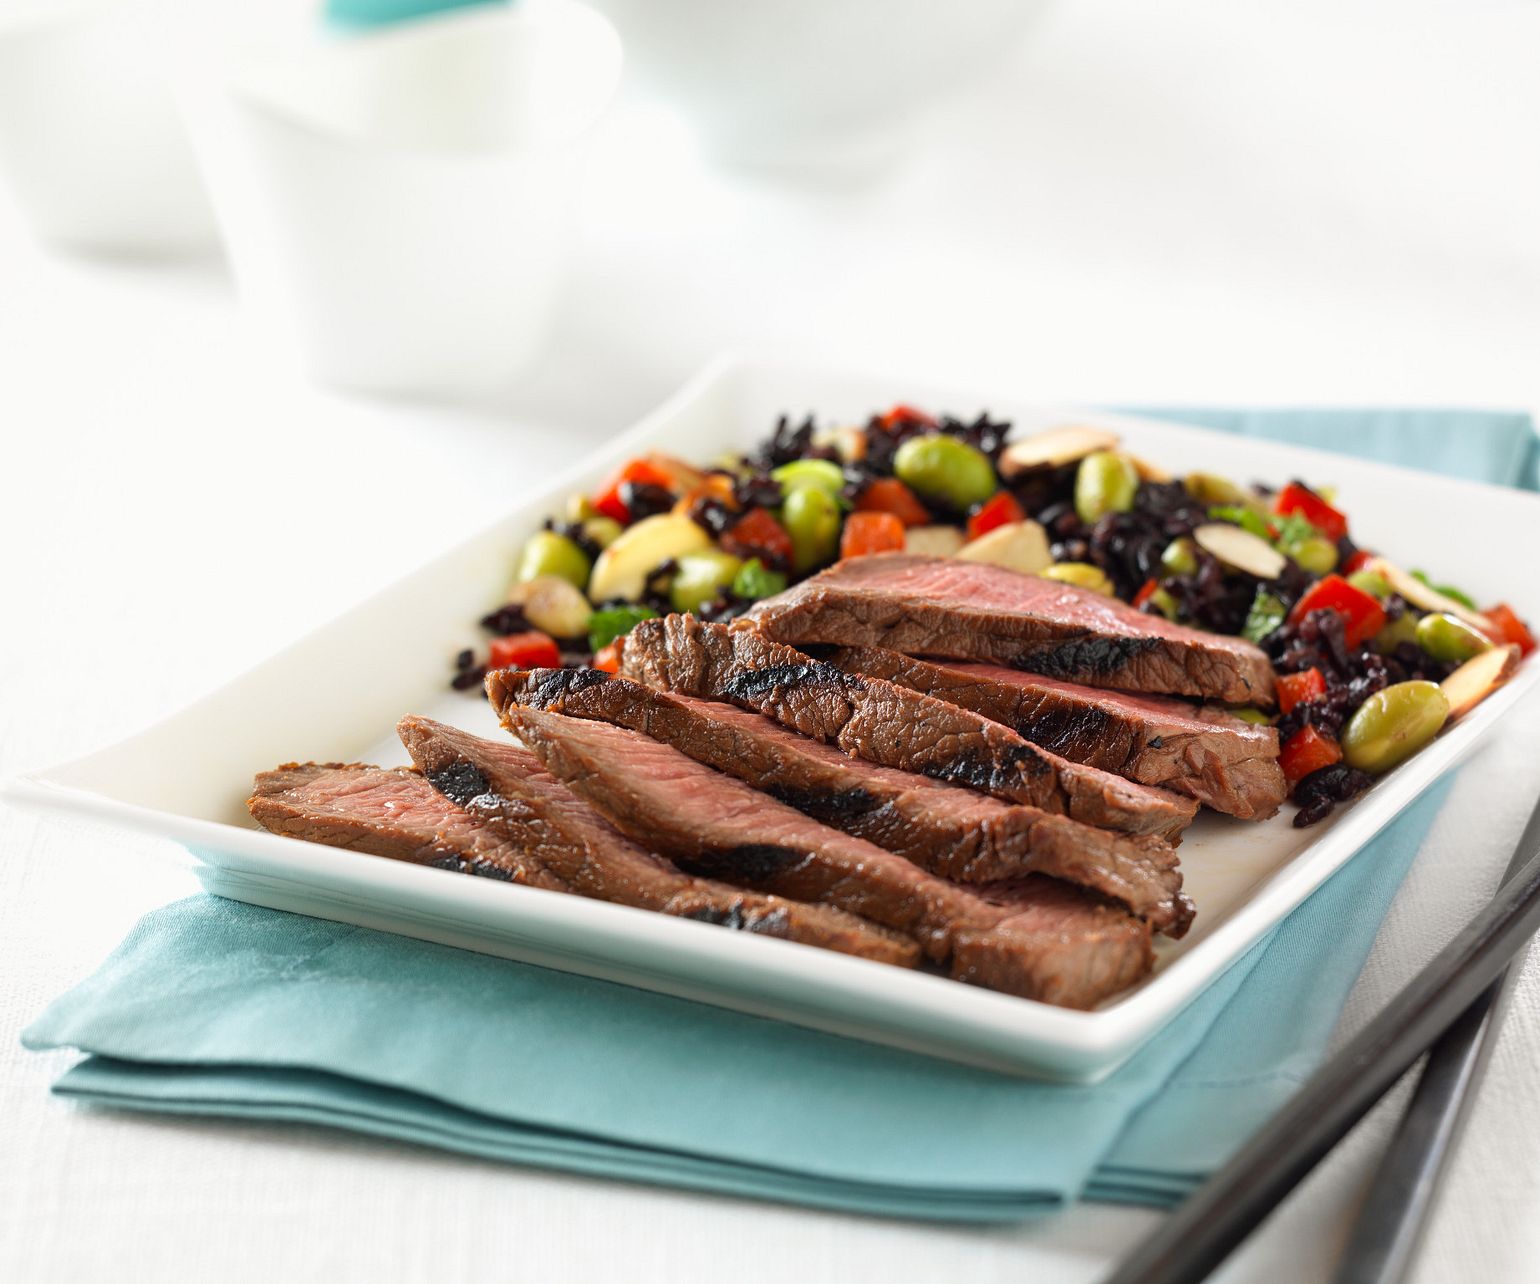 Asian-Spiced Steak with “Forbidden” Rice and Vegetable Salad